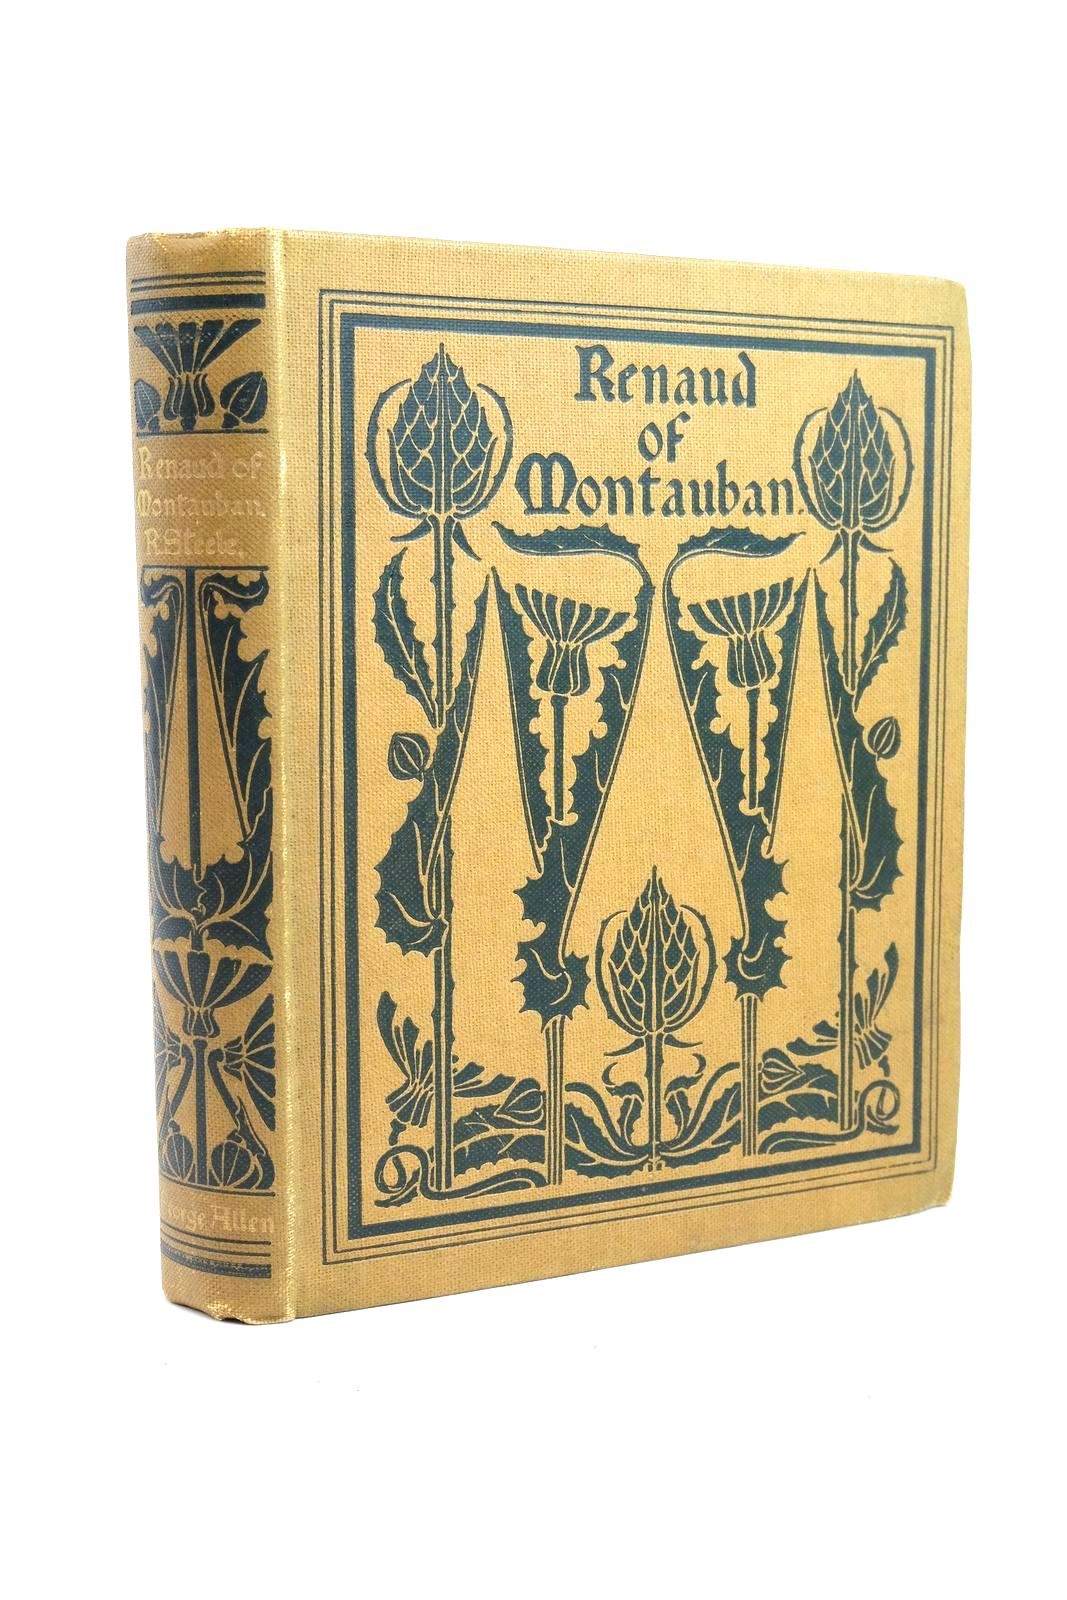 Photo of RENAUD OF MONTAUBAN written by Steele, Robert illustrated by Mason, Frederick published by George Allen (STOCK CODE: 1321146)  for sale by Stella & Rose's Books